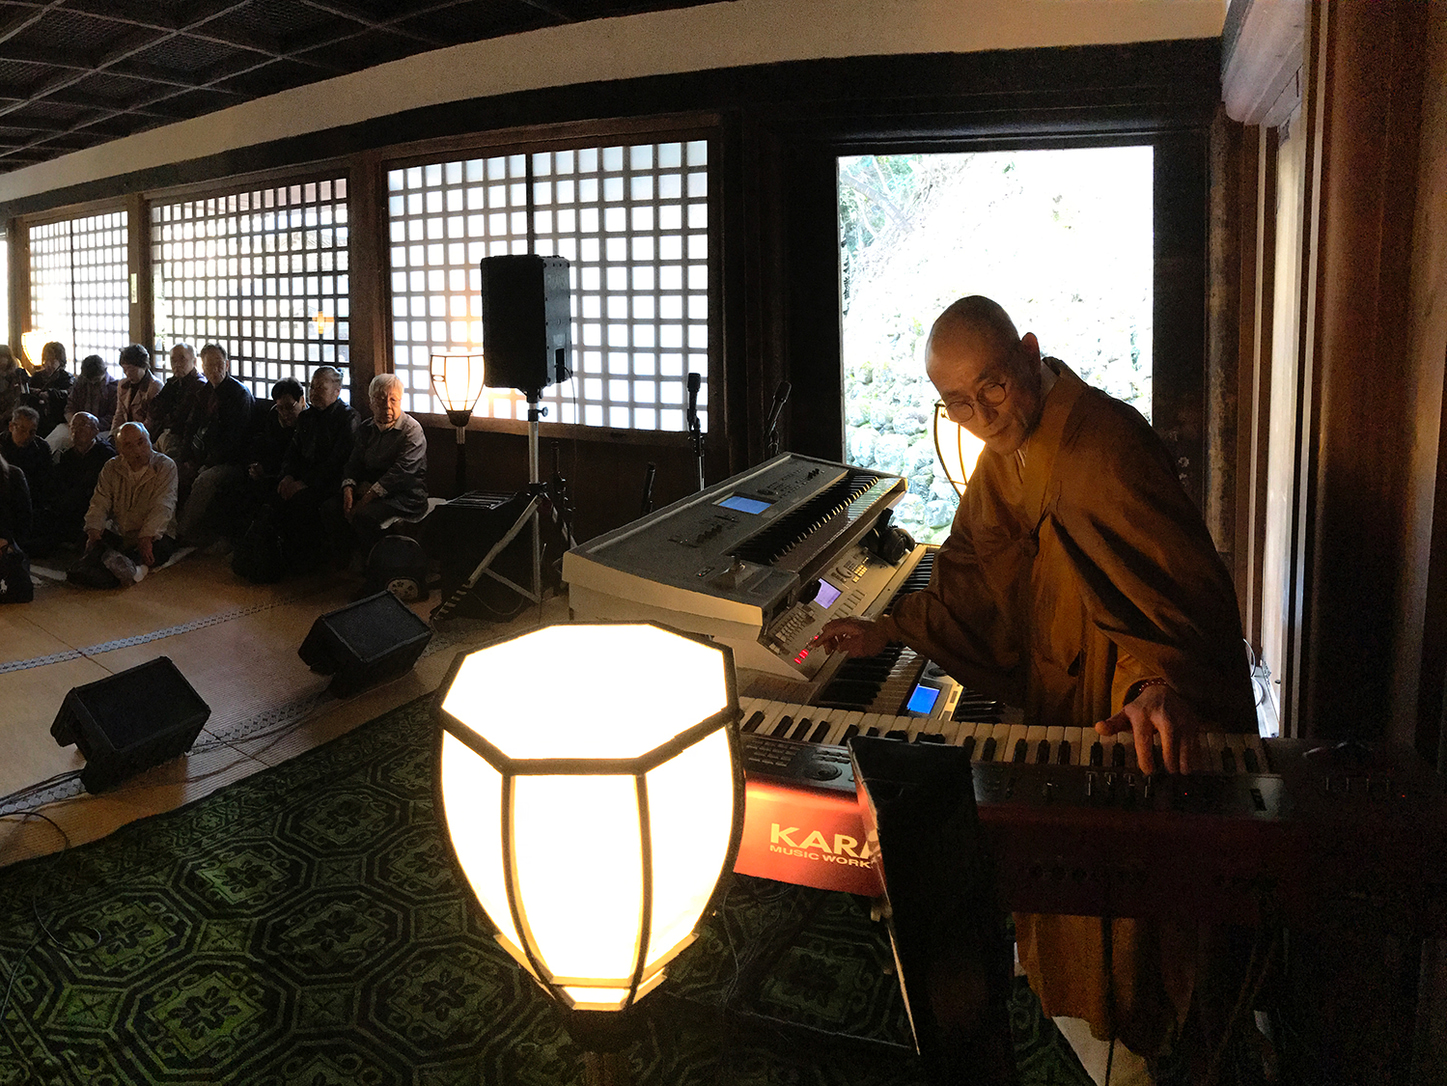 The Kyoto Priest Spreading Buddhism Through Electronic Music